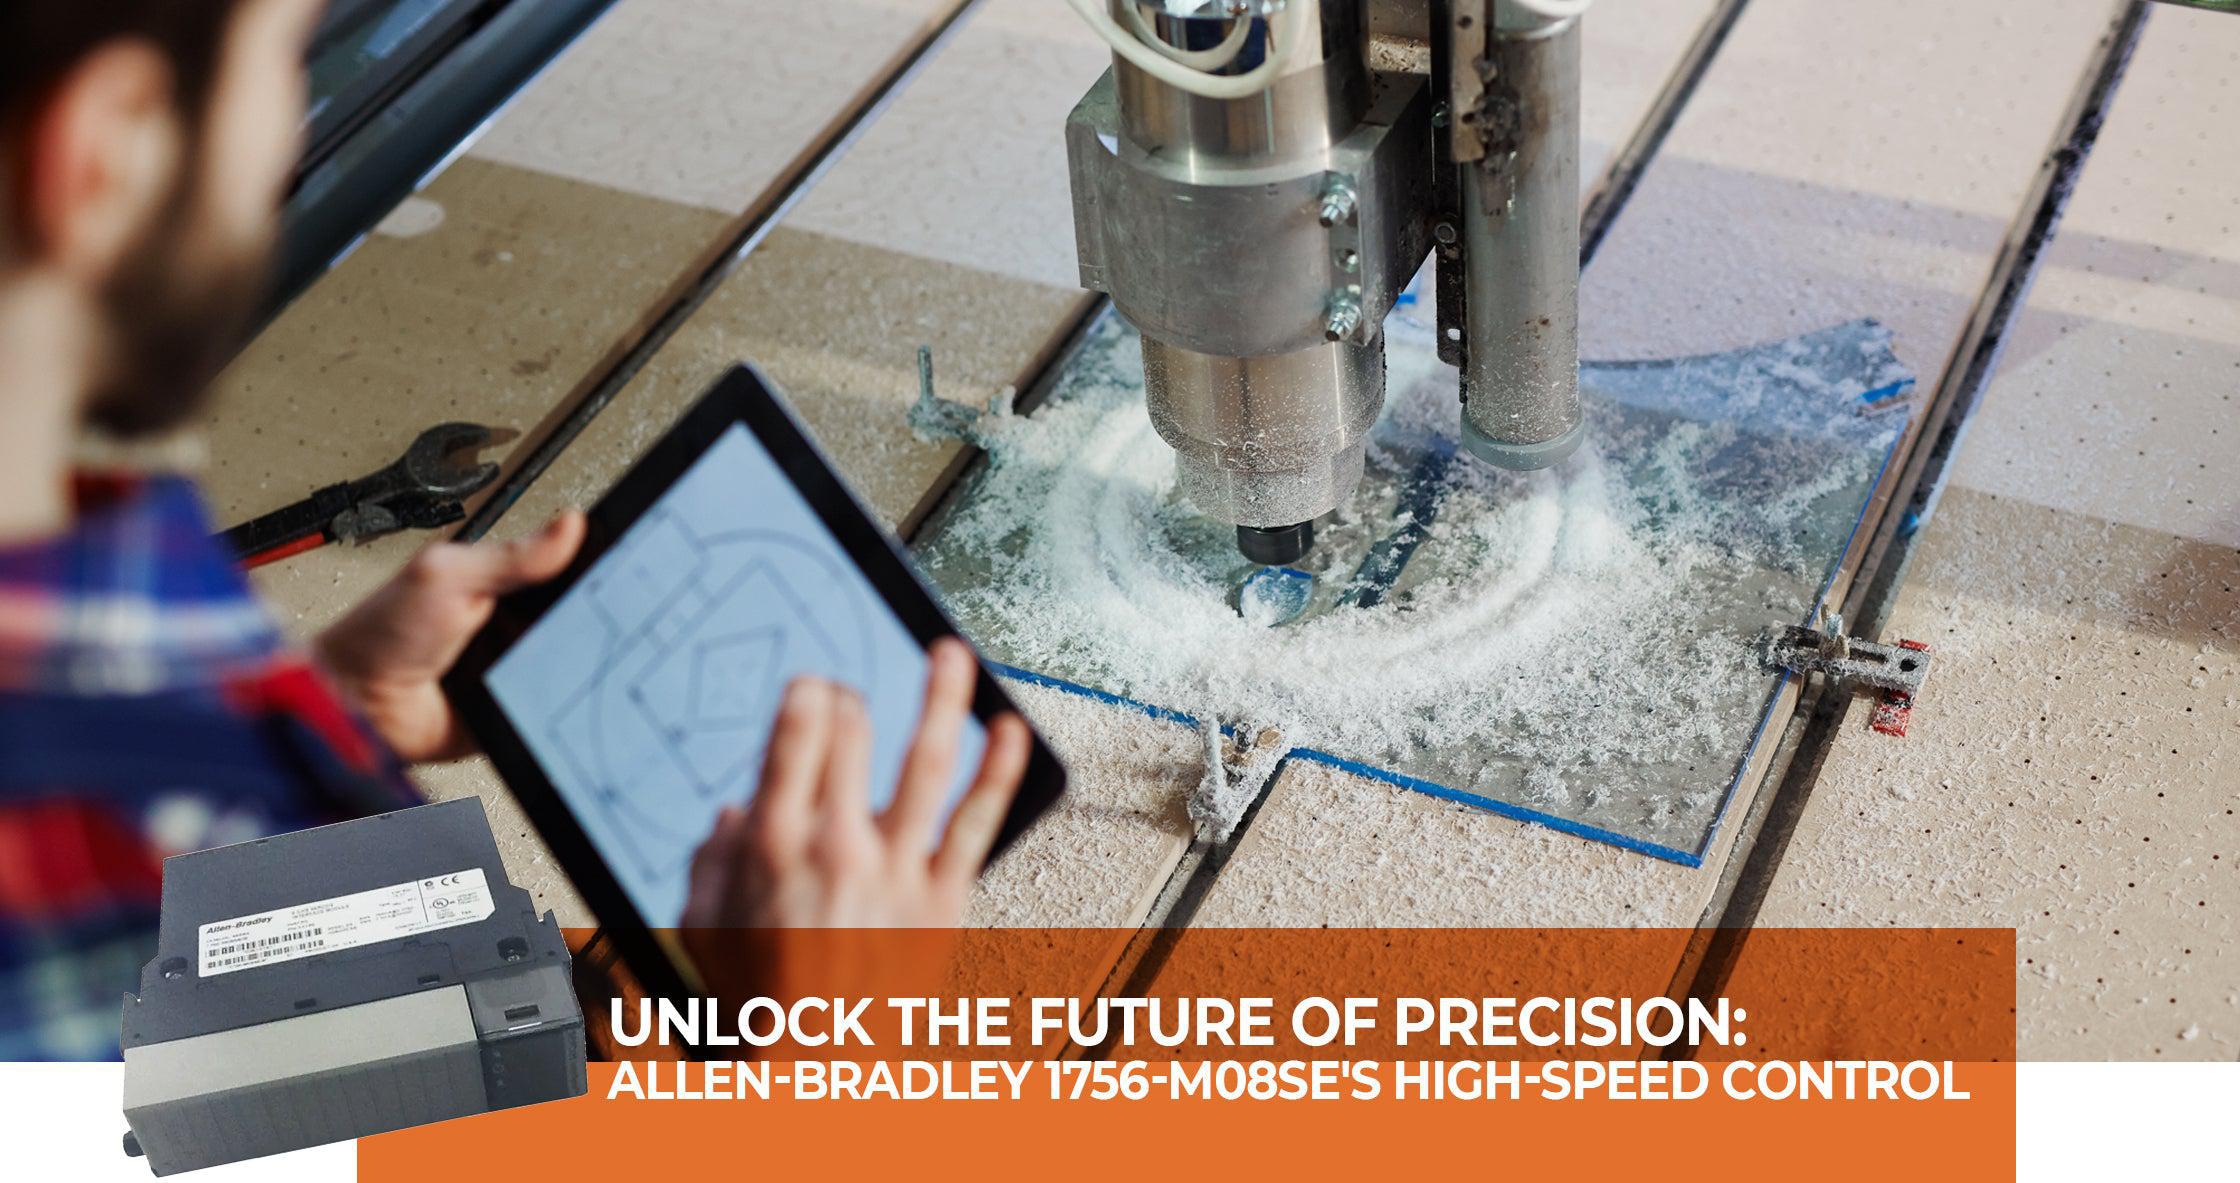 Engineer with tablet programming a high-speed CNC machine with Allen-Bradley 1756-M08SE module for precise fabrication.